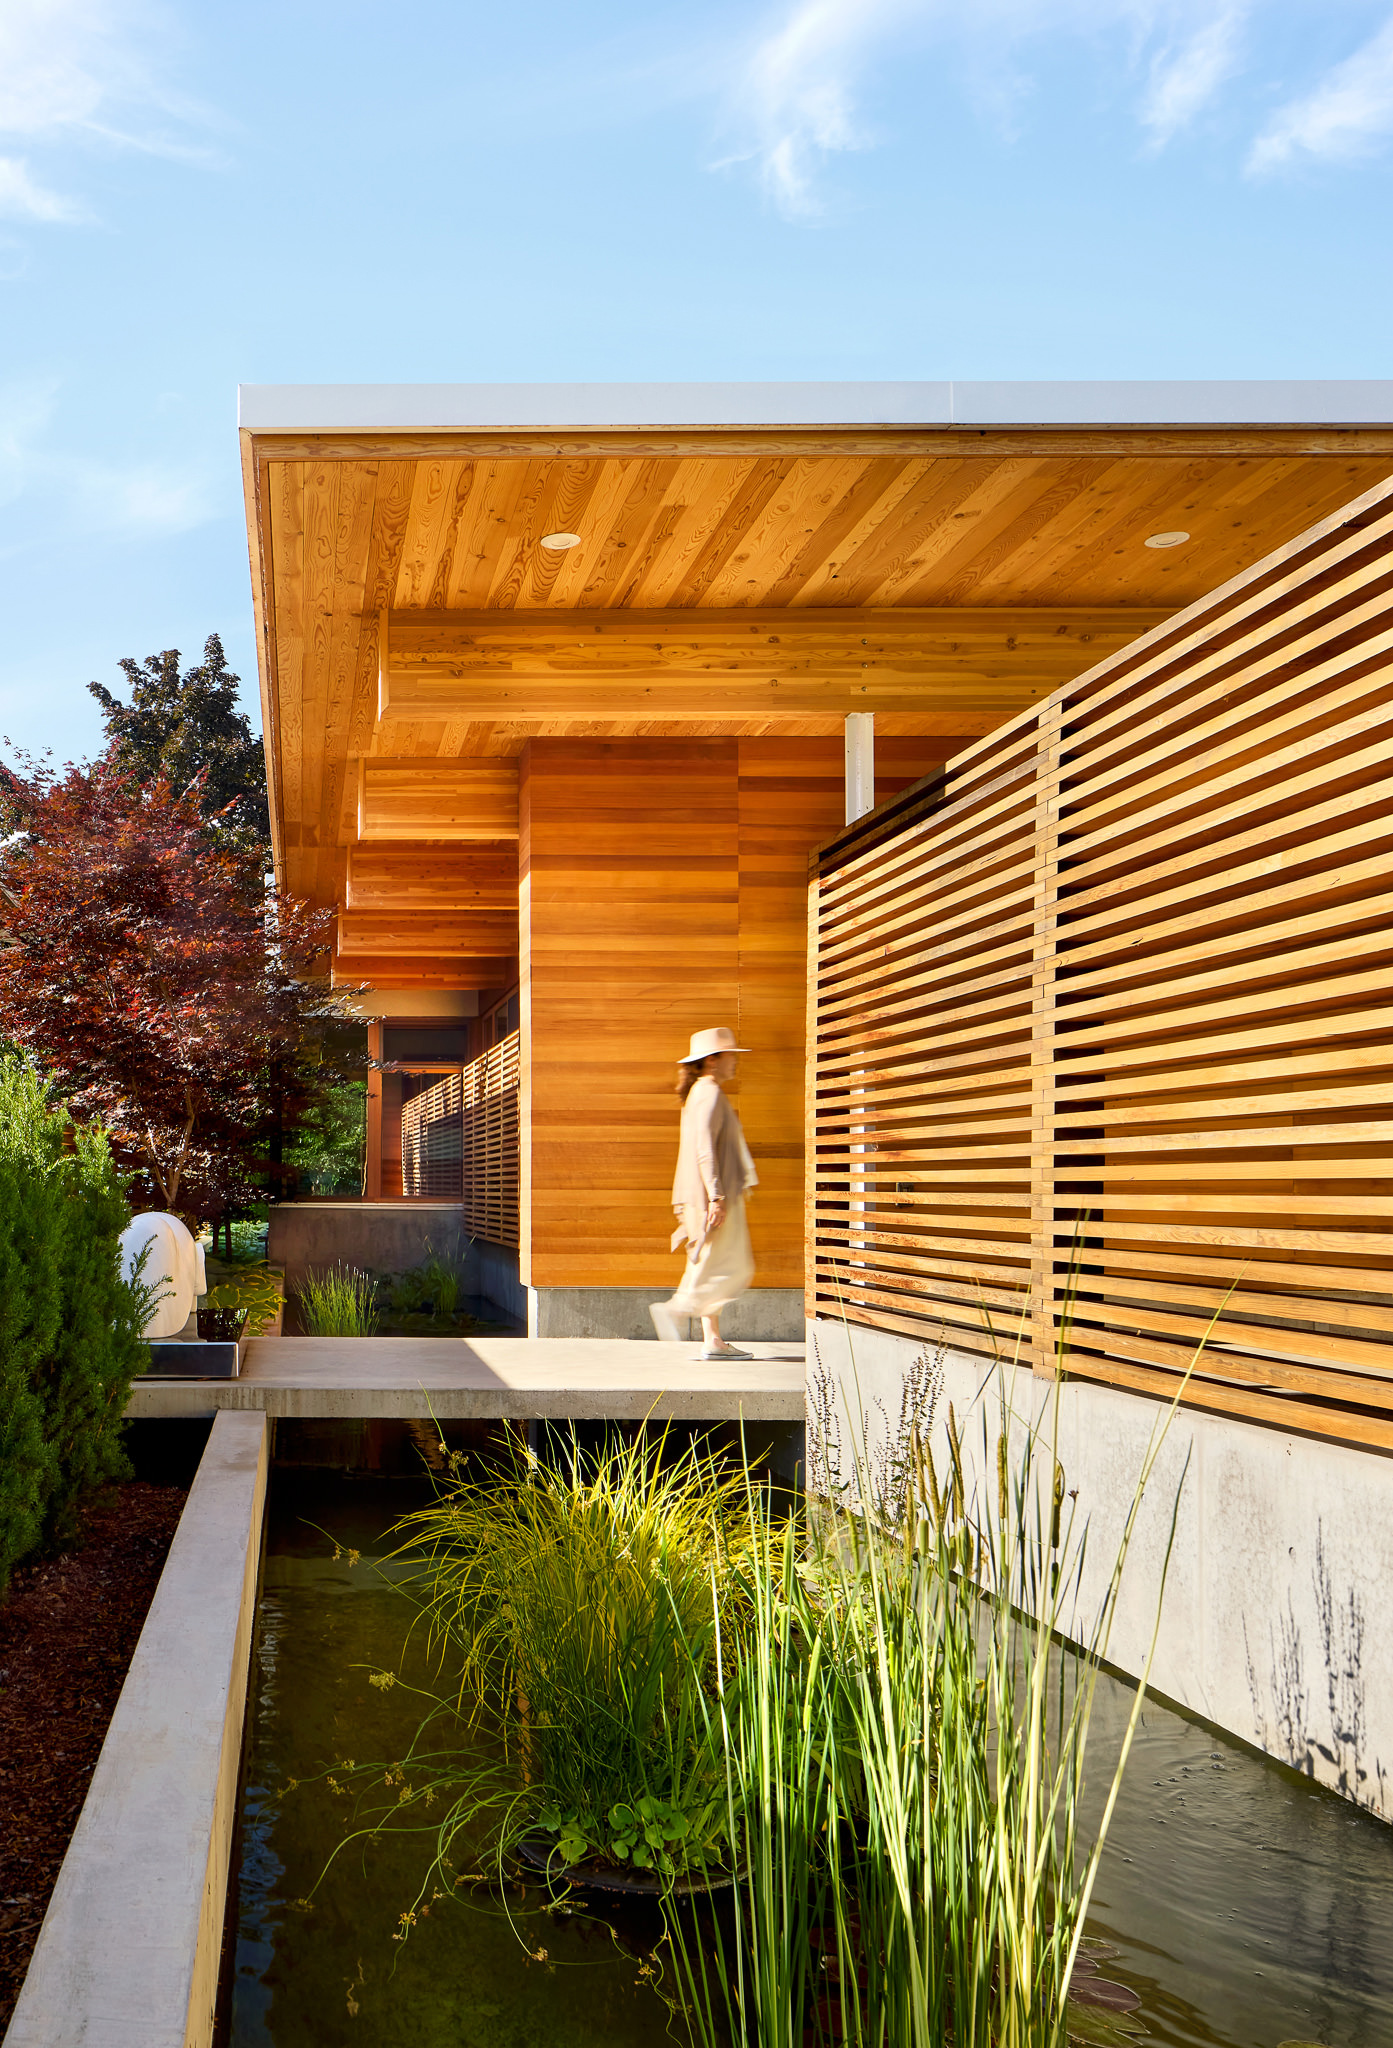 Modern Wood Residence With Woman Walking Over Water Feature